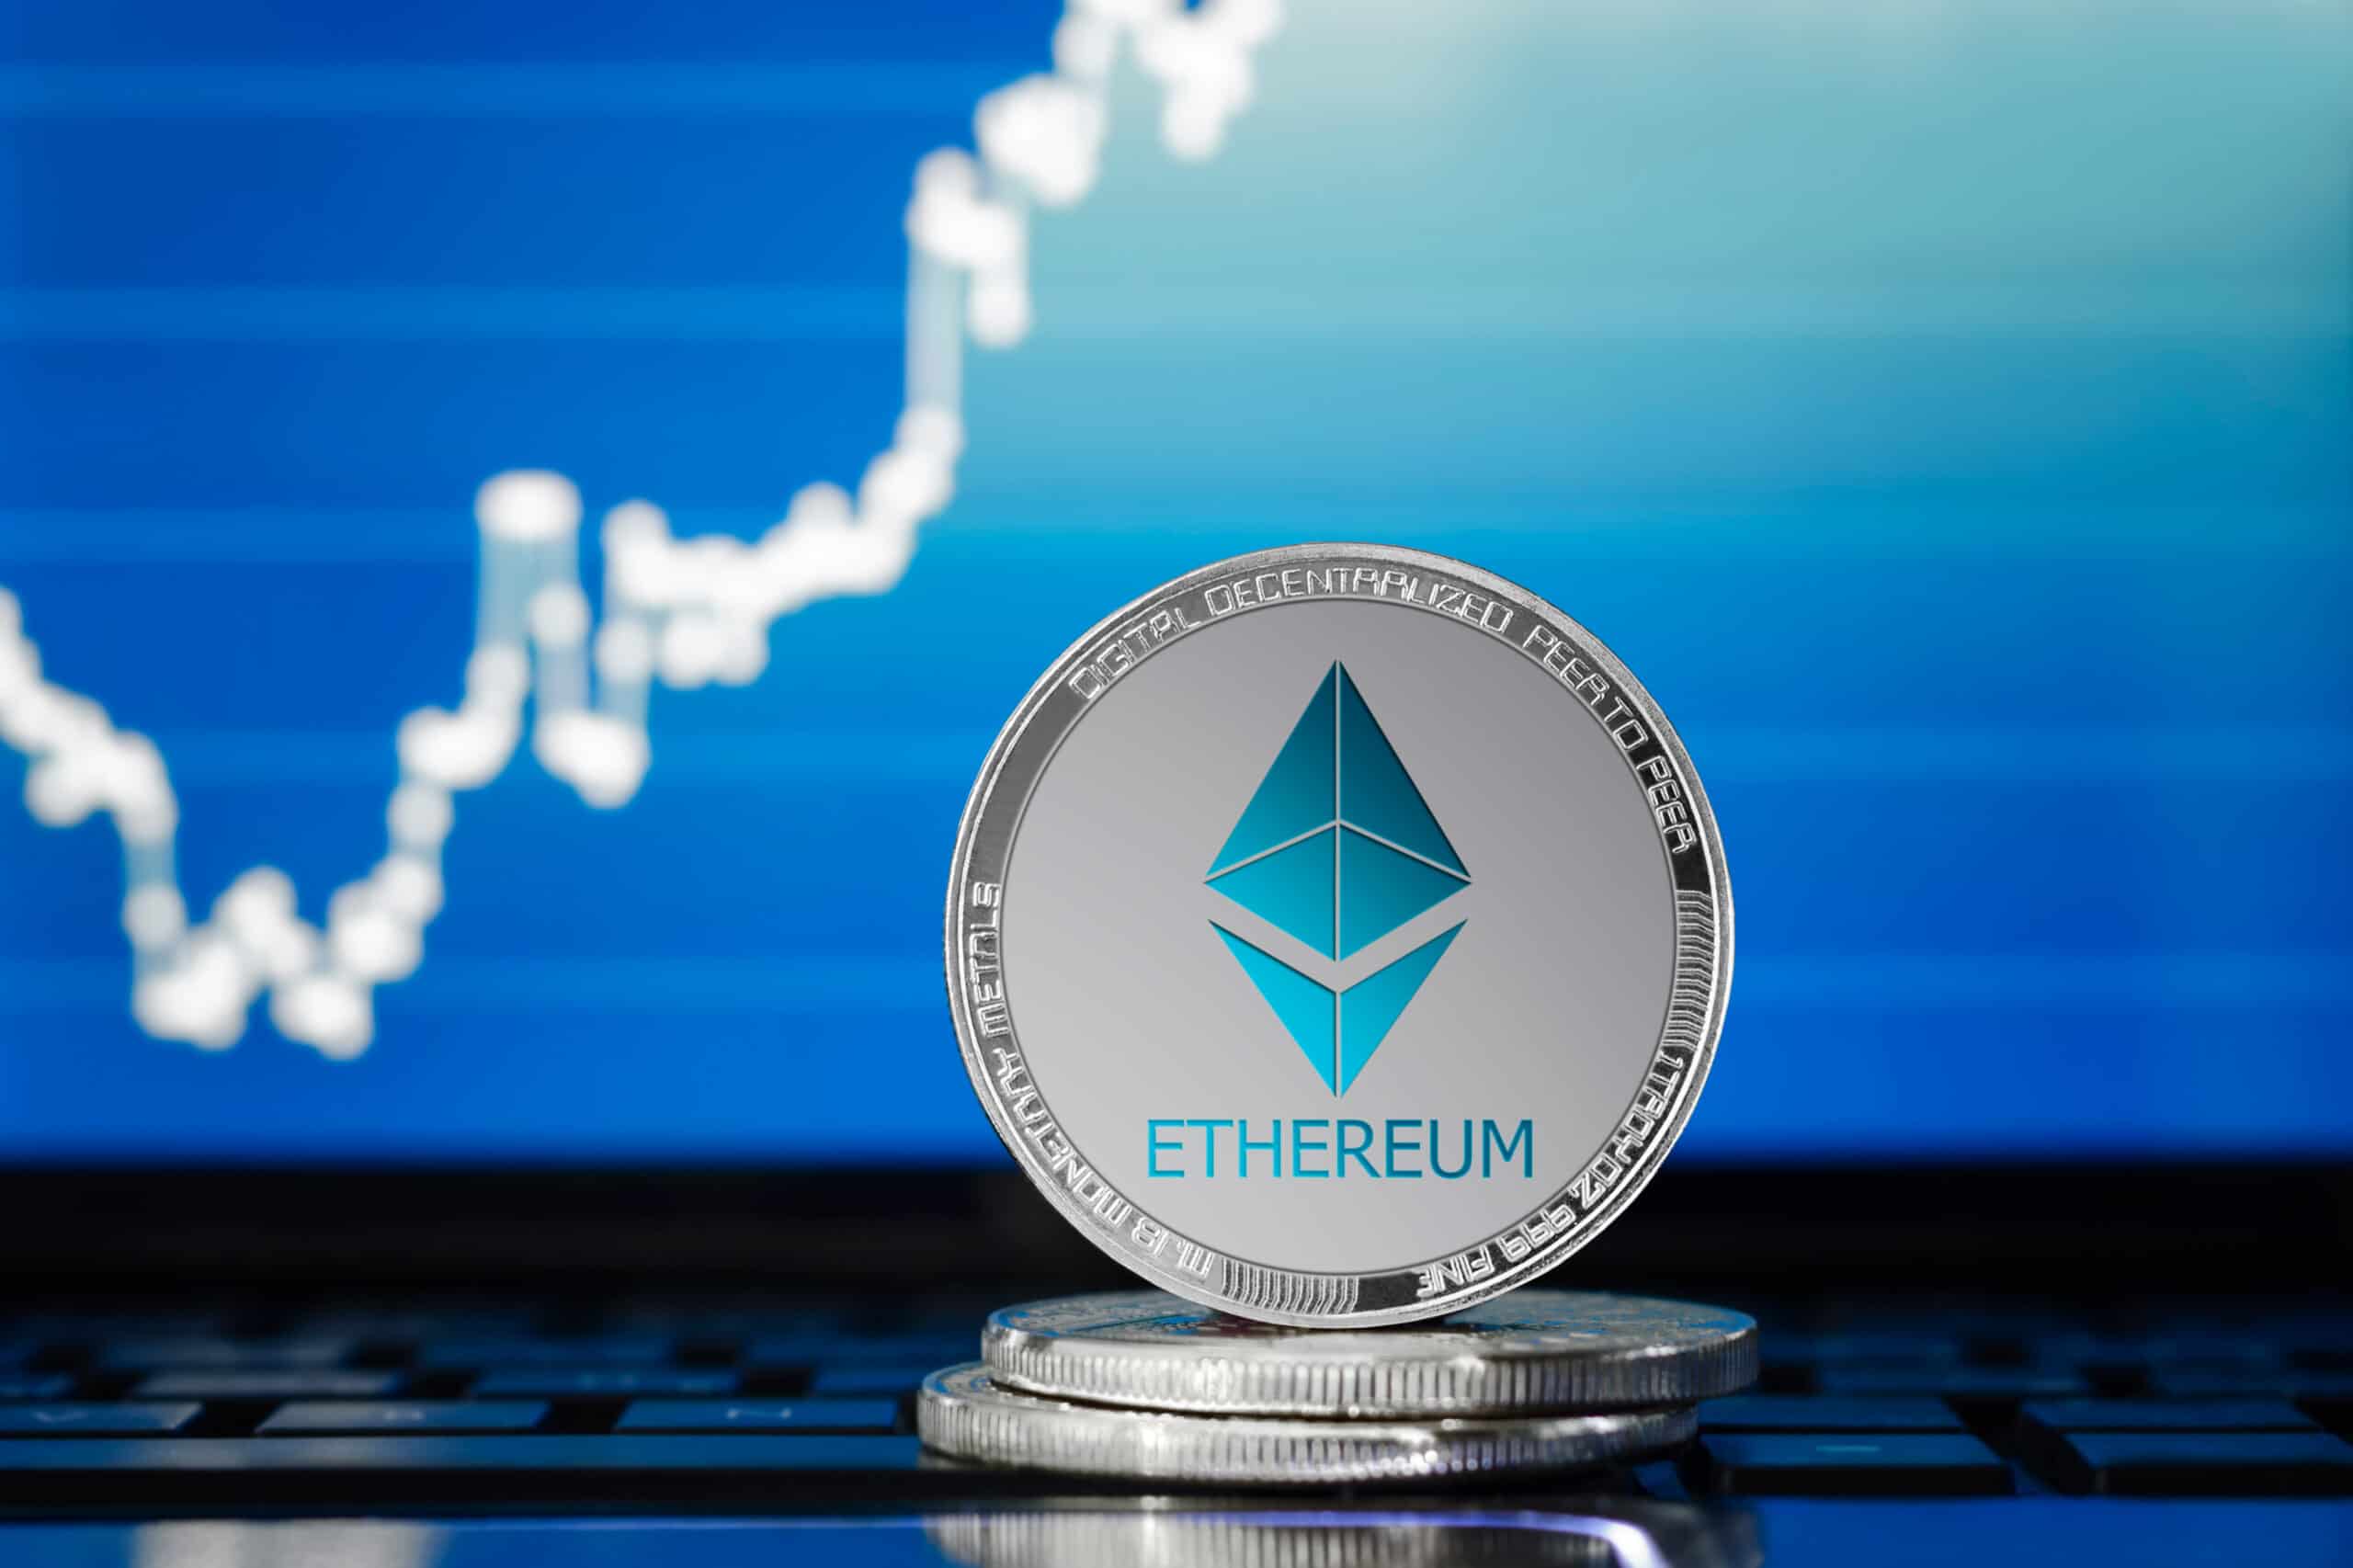 Ethereum is a decentralized platform that runs smart contracts: applications that run exactly as programmed without any possibility of downtime, censorship, fraud, or third-party interference.